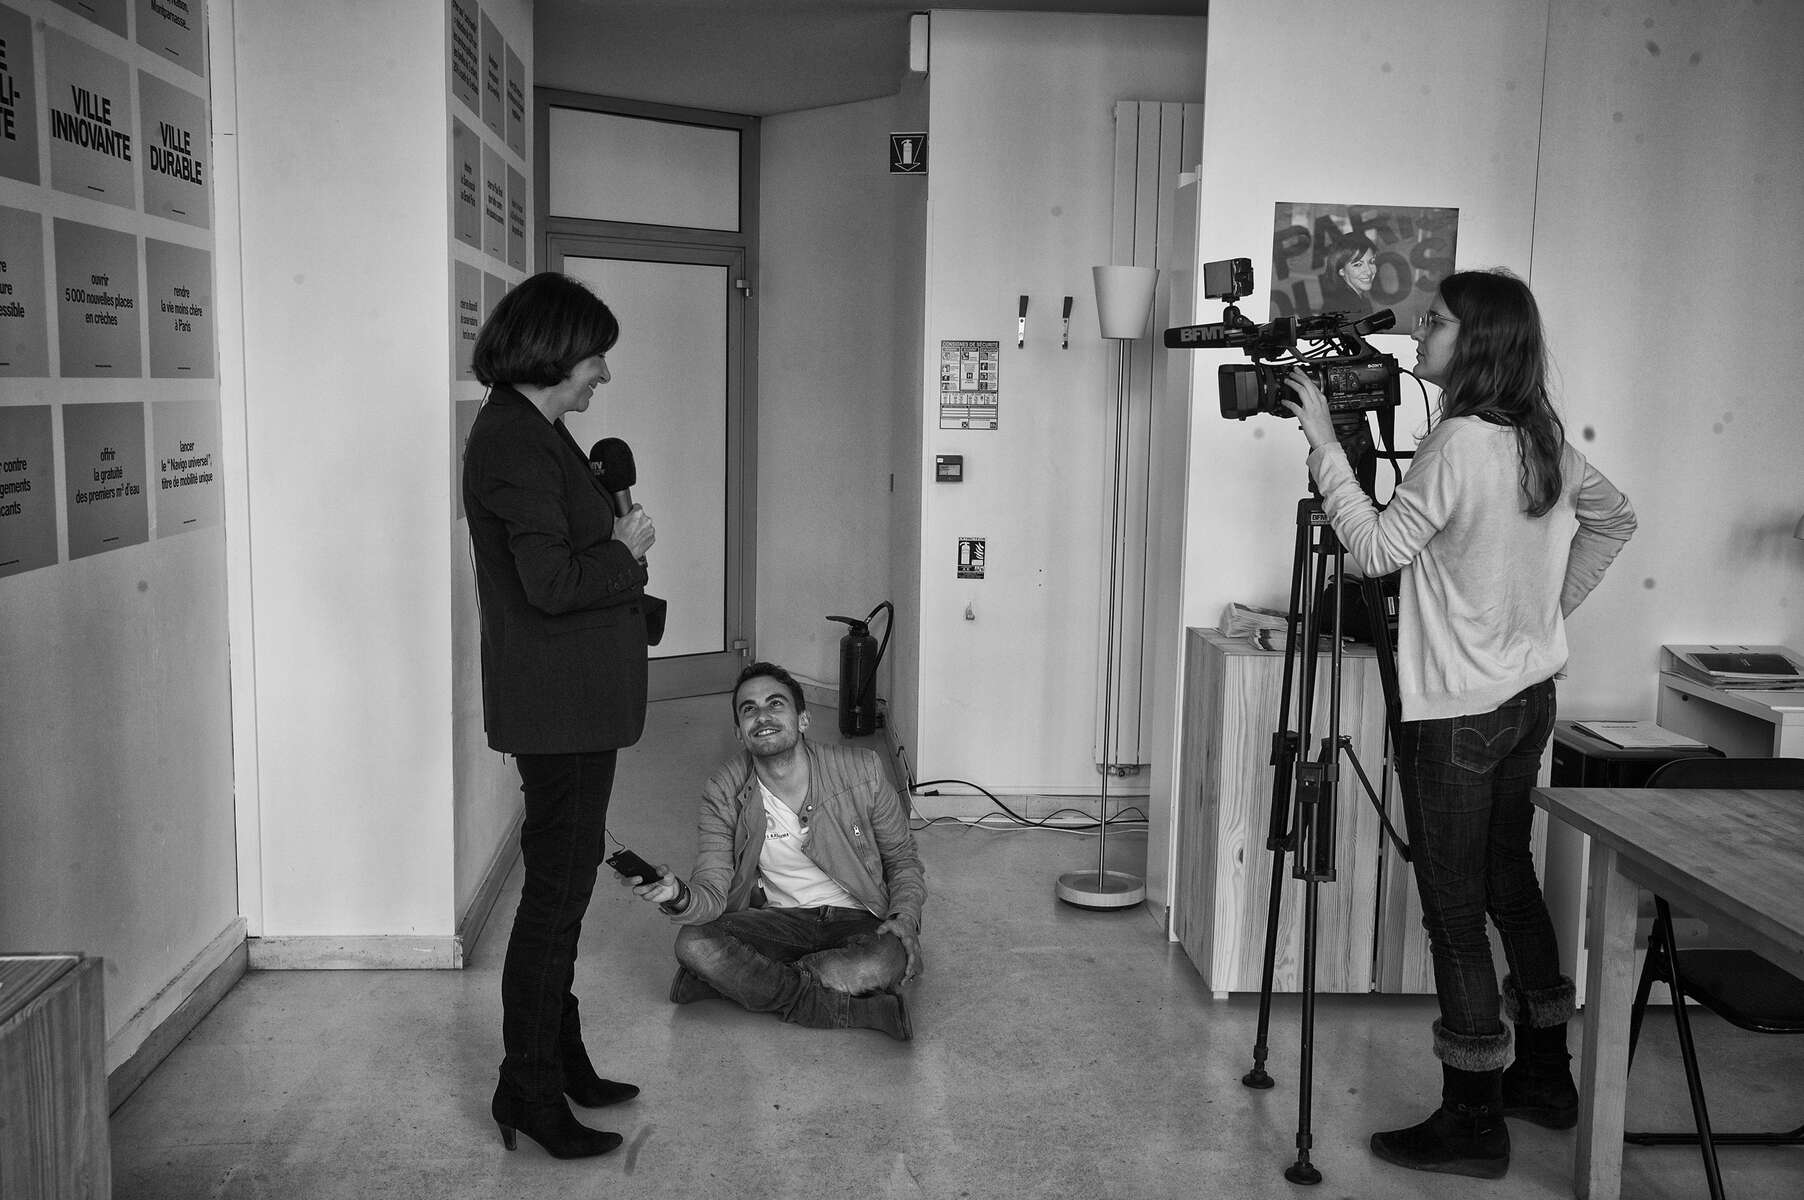 March 16, 2014.  PARIS, FRANCE- Press liaison Hervé Marro holds up a recorder as mayoral candidate Anne Hidalgo does a television interview in her campaign's headquarters in Paris' Bastille neighborhood.   For the first time in France's history, Paris will have a woman as a mayor - either Socialist Anne Hidalgo or Center-Right Nathalie Kosciusko-Morizet.  Photo by Scout Tufankjian